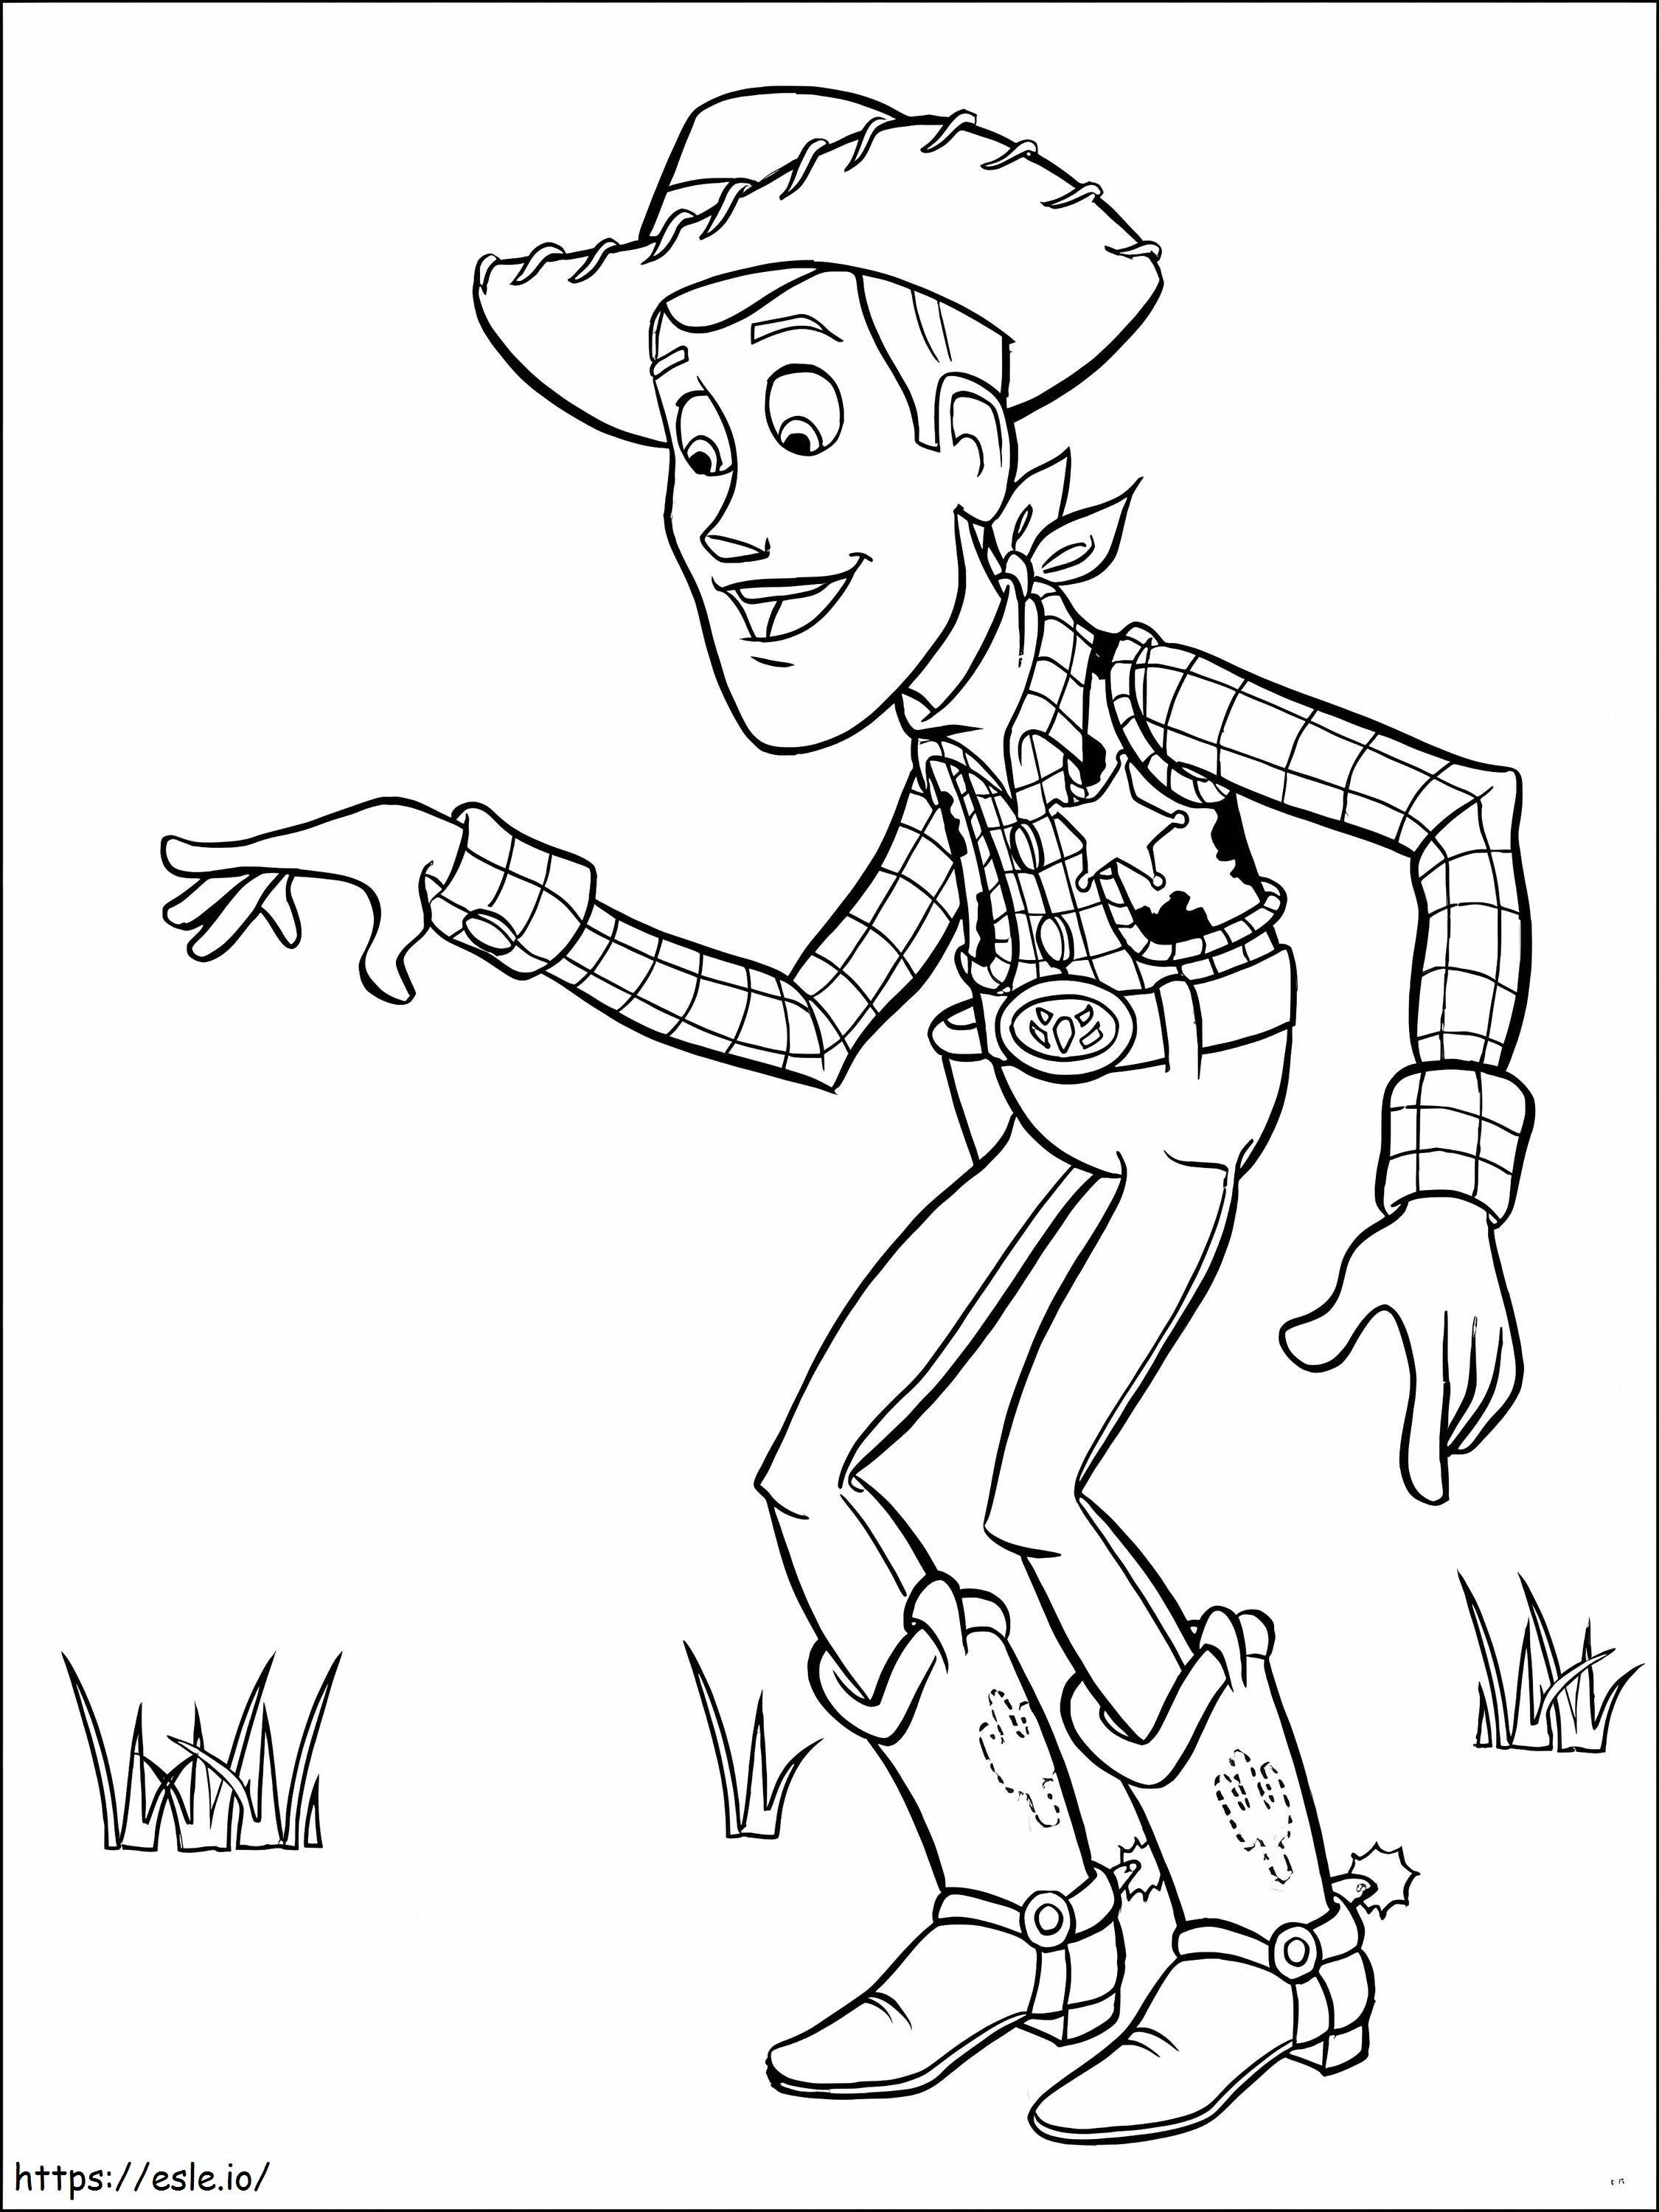 Woody Normal coloring page